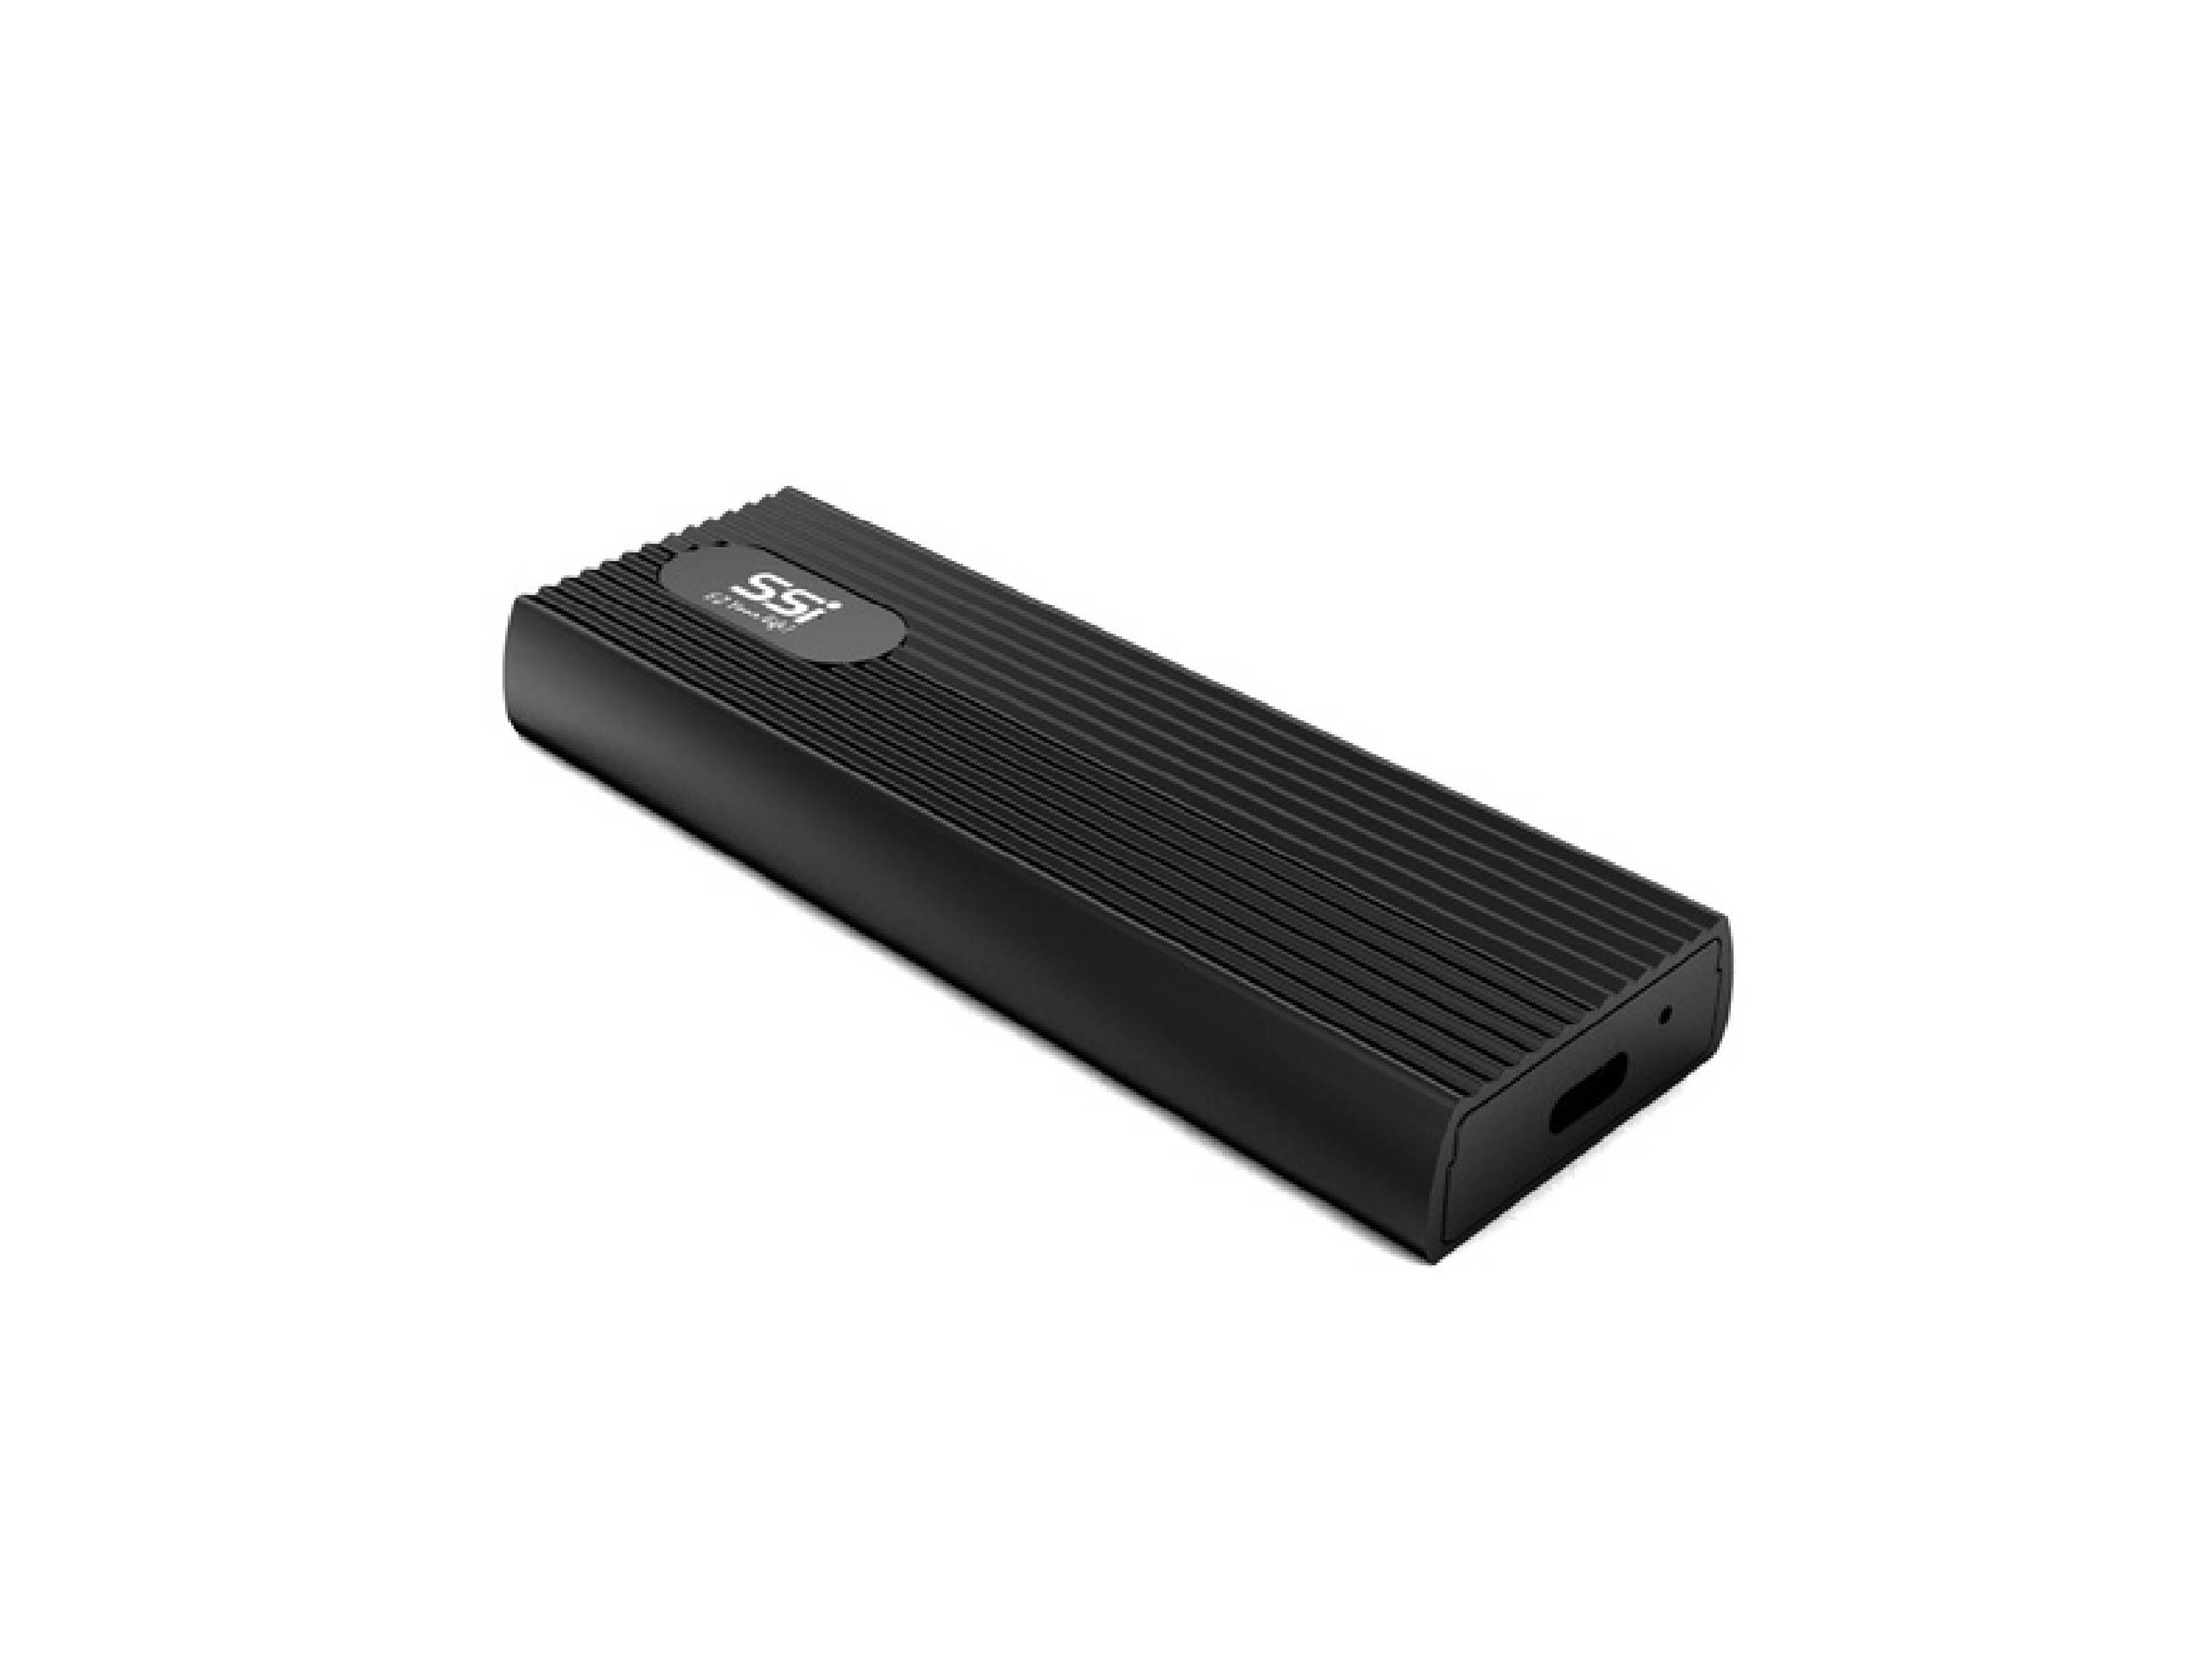 M.2 NVMe/SATA SSD Enclosure, Finned Design (SI-8612US31C), compatible with 1x B+M Key M.2 SATA SSD 6Gbps, USB3.2 -C 10Gbps to host.